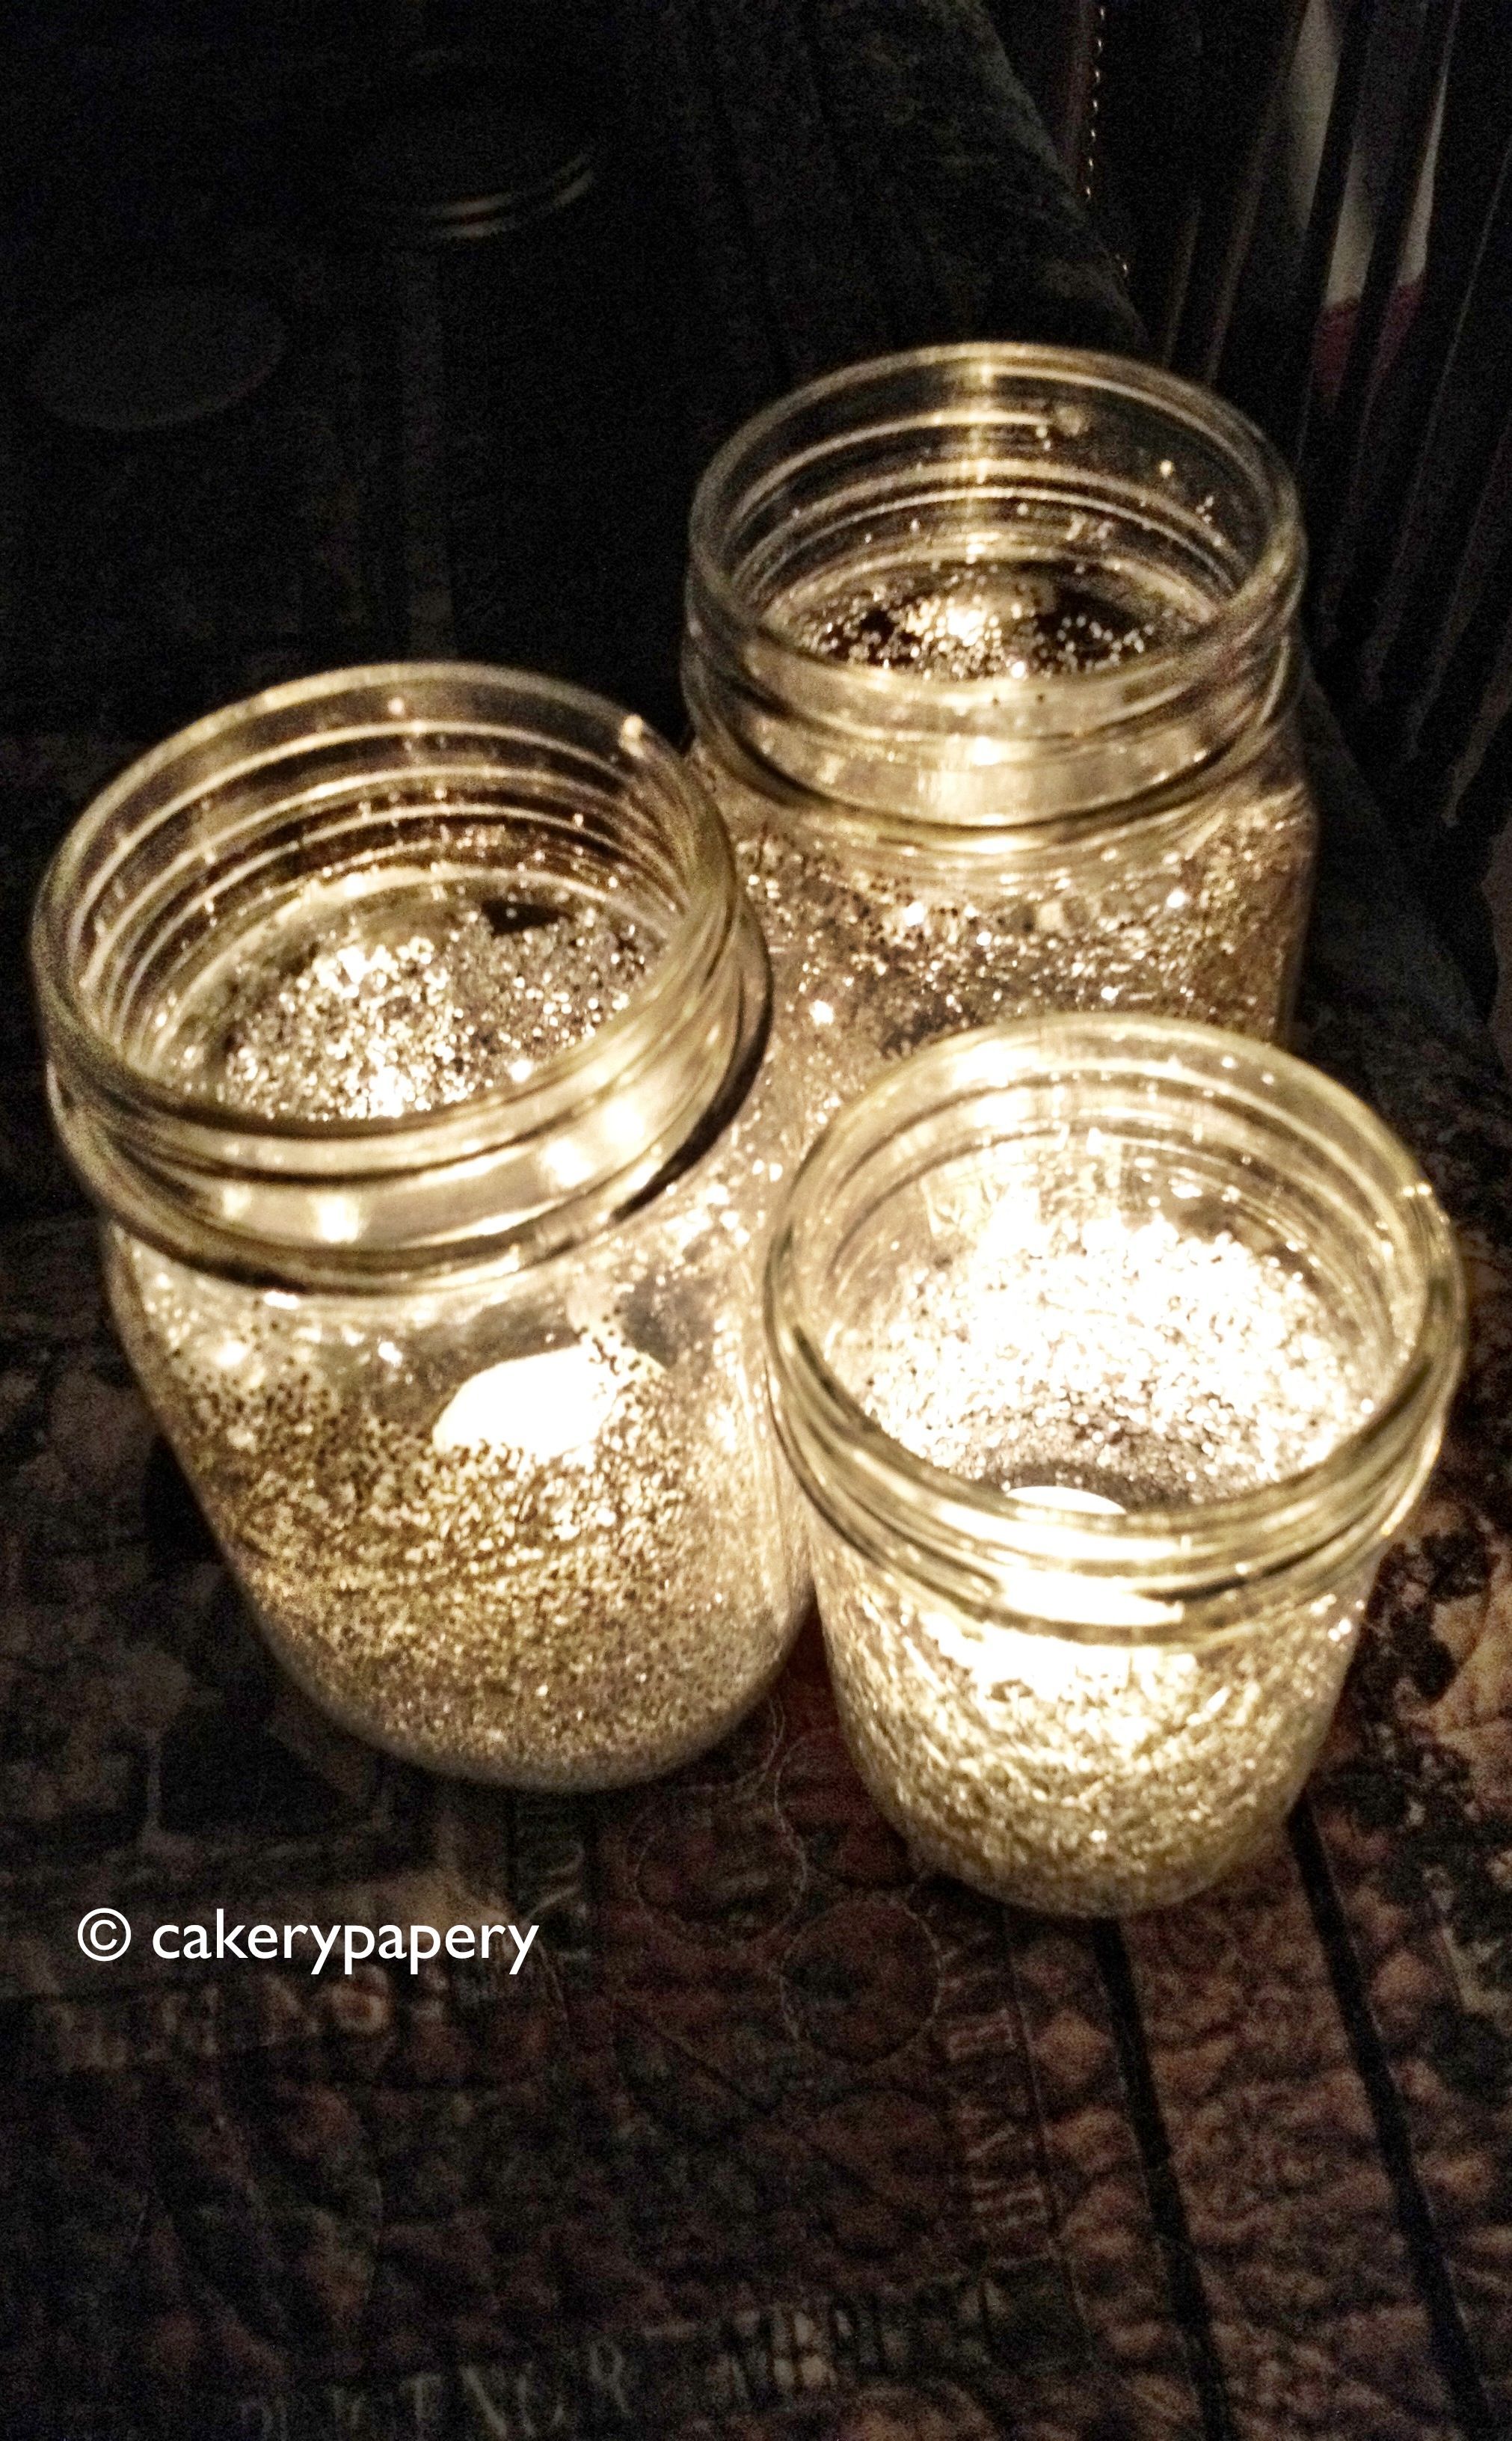 Mix water with Elmers glue and brush the inside of the mason jars. Add glitter o